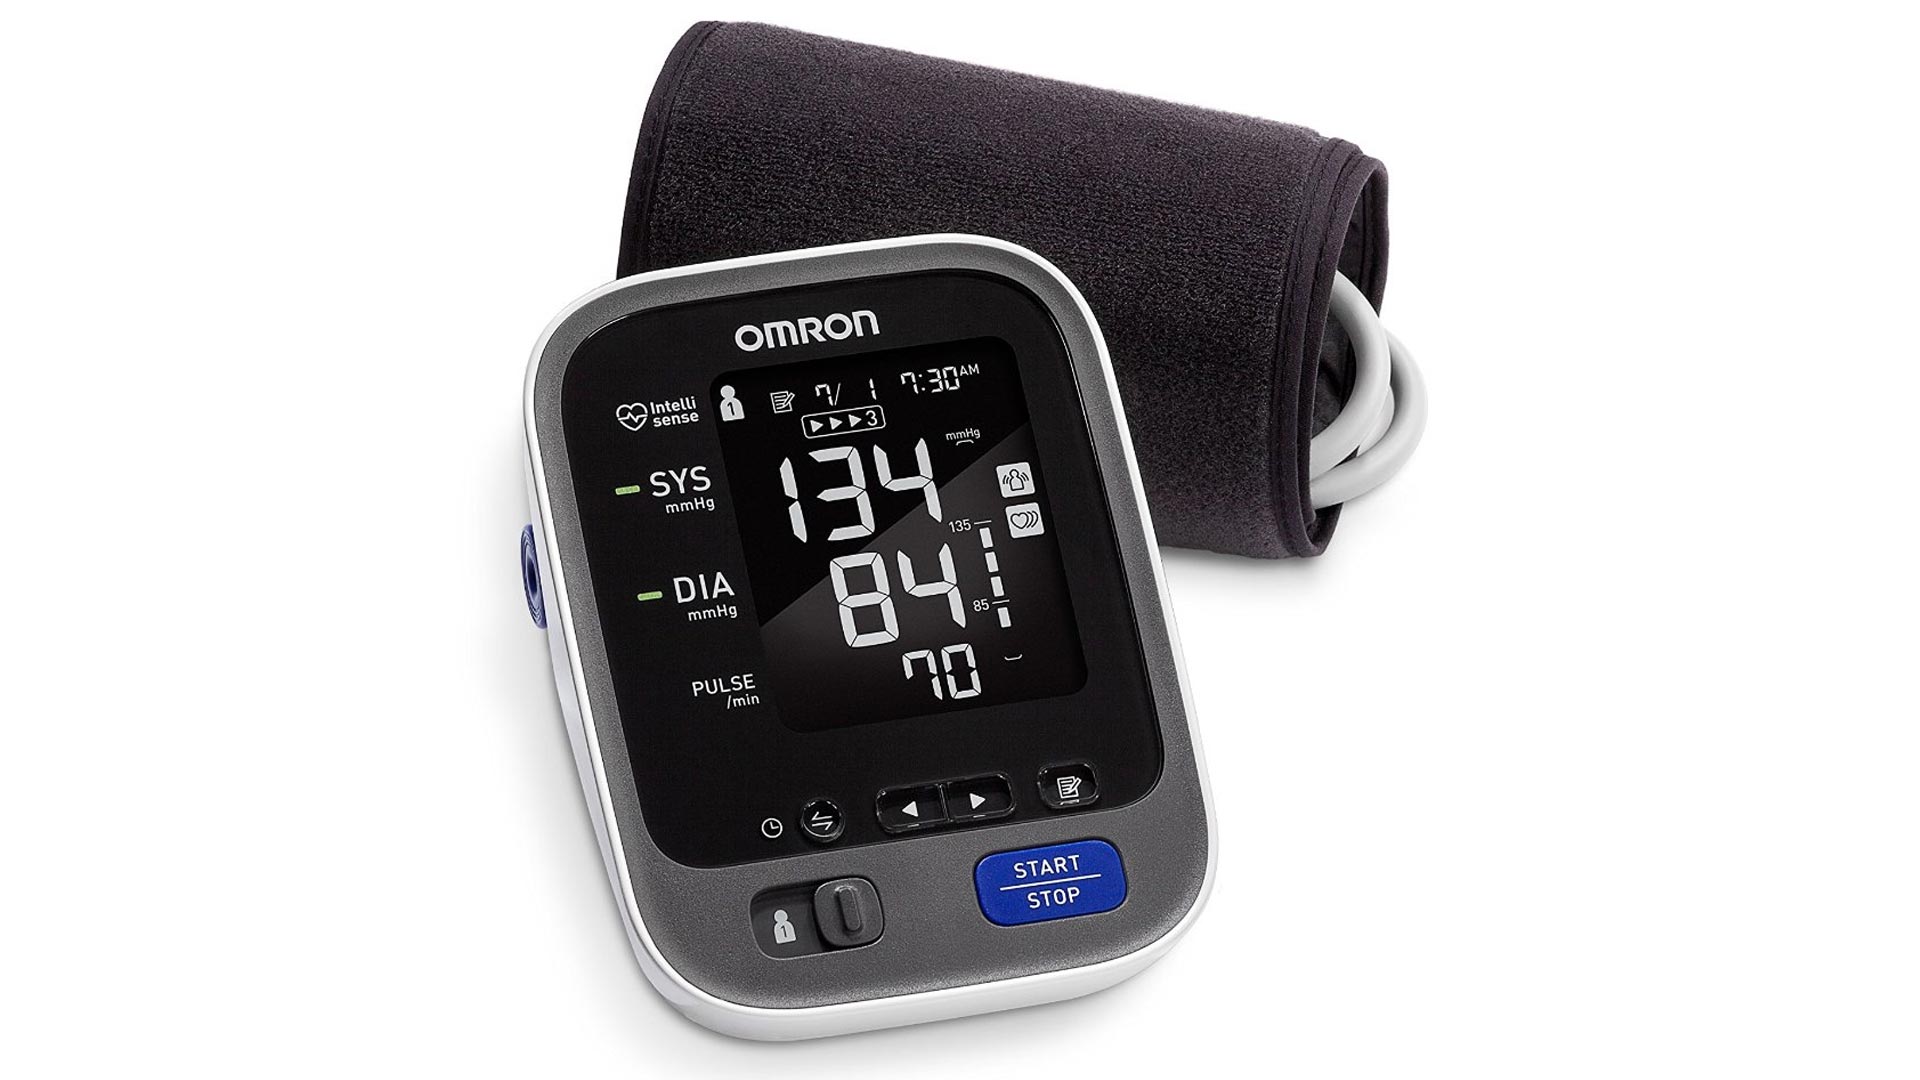 https://9to5toys.com/wp-content/uploads/sites/5/2018/02/omron-10-series-wireless-bluetooth-blood-pressure-monitor.jpg